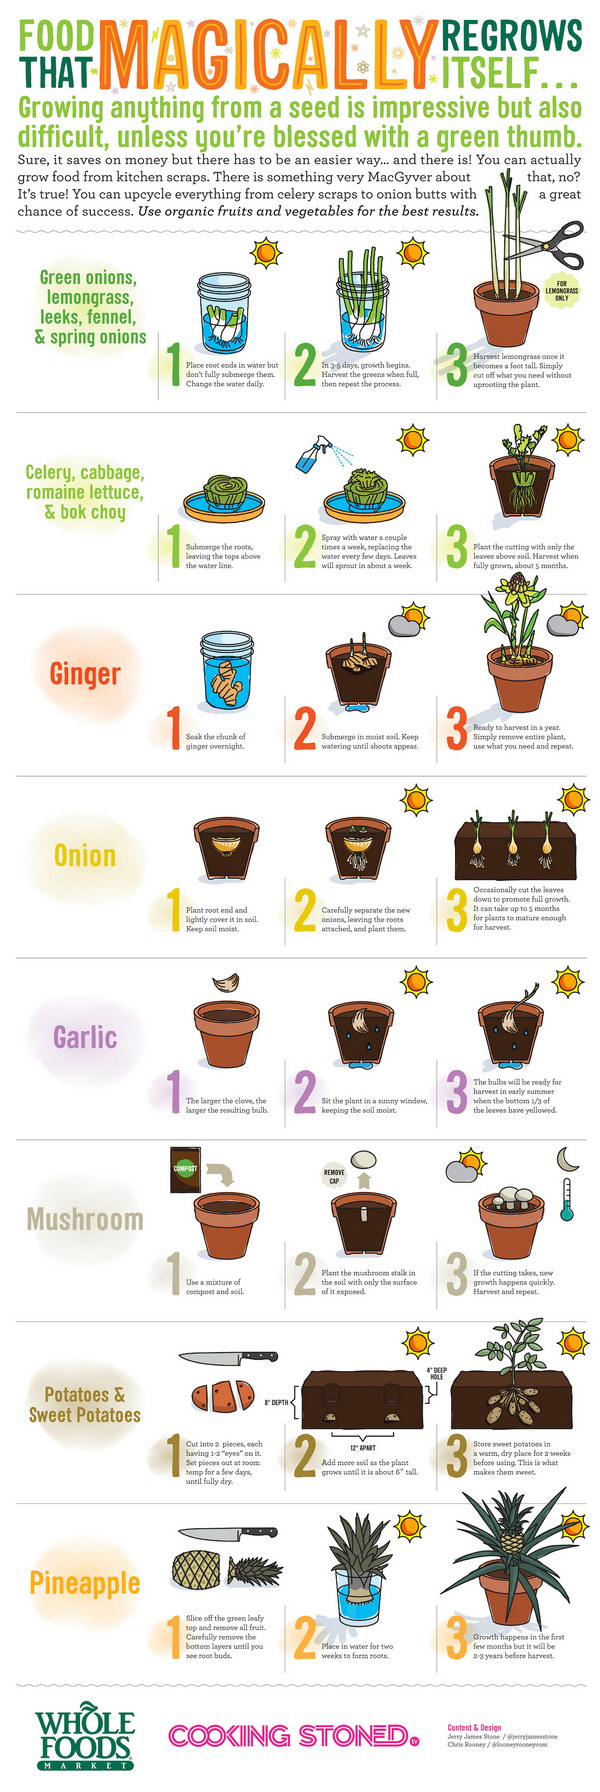 Upcycle Your Vegetable Scraps And Regrow Them Easily. 